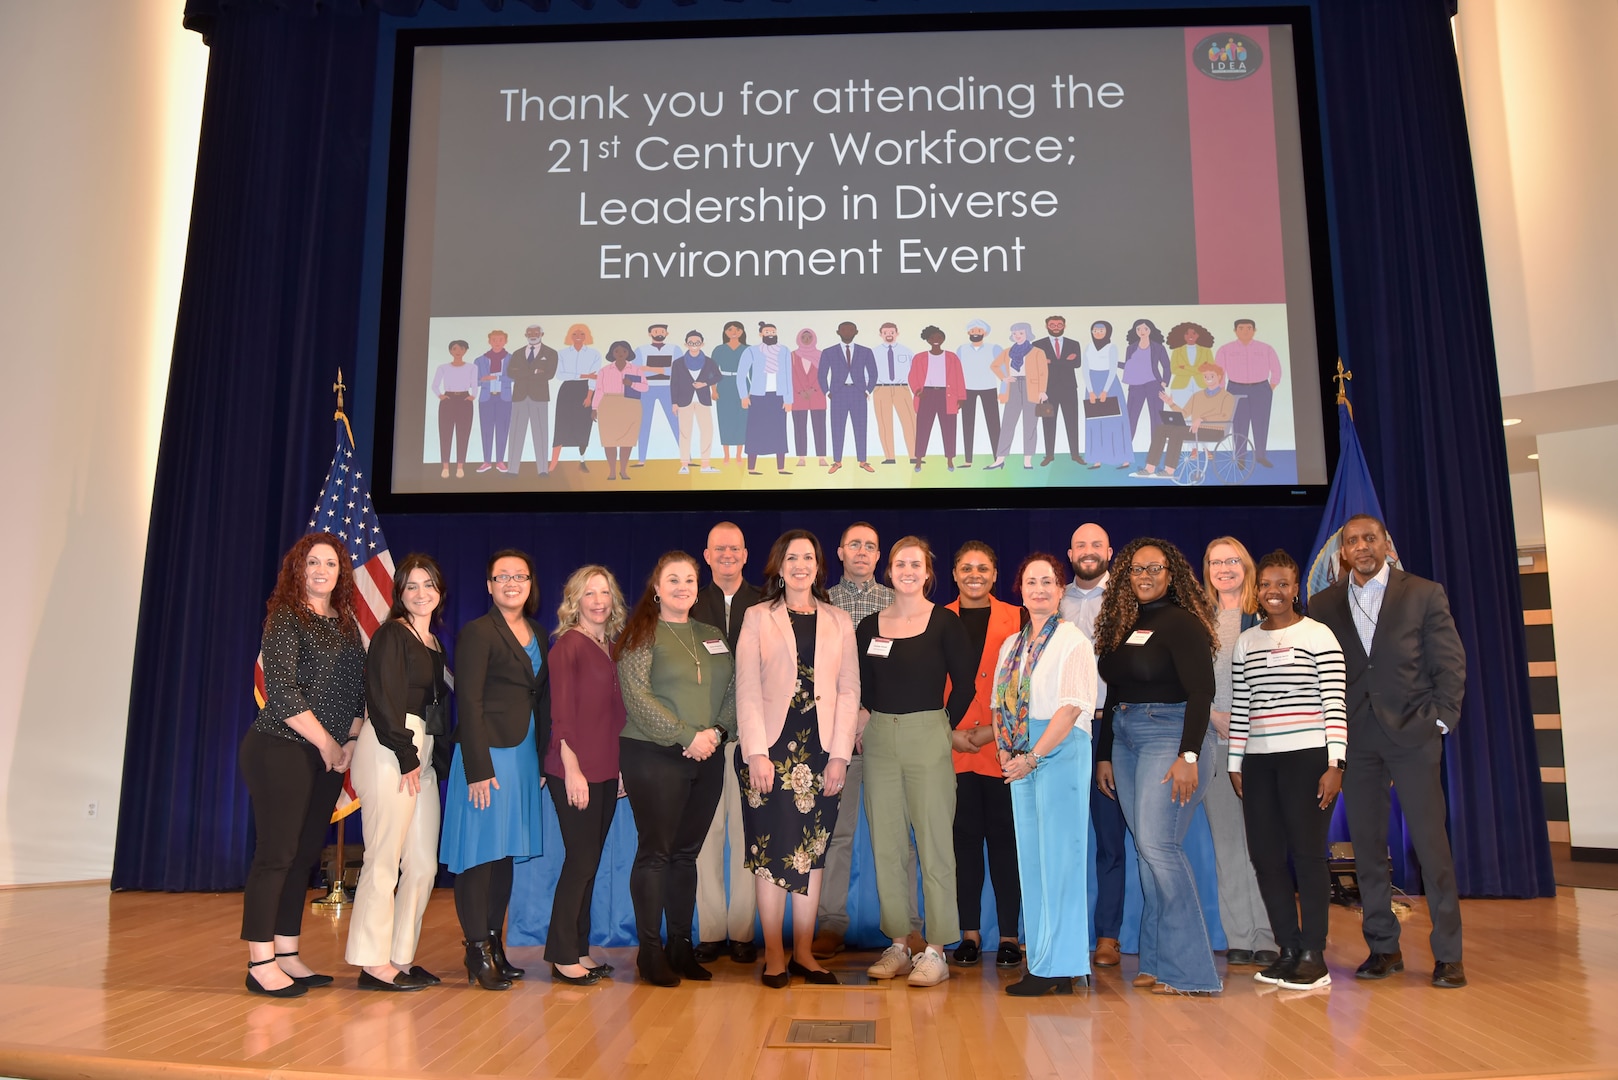 Members of Naval Surface Warfare Center, Carderock Division's Inclusion, Diversity, Equity and Accessibility Employee Resource Group (IDEA ERG) pose on stage after successfully hosting the 21st Century Workforce Leadership in a Diverse Environment Event (LDEE) in West Bethesda, Md., on March 1. (U.S. Navy photo by Brittny Odoms)